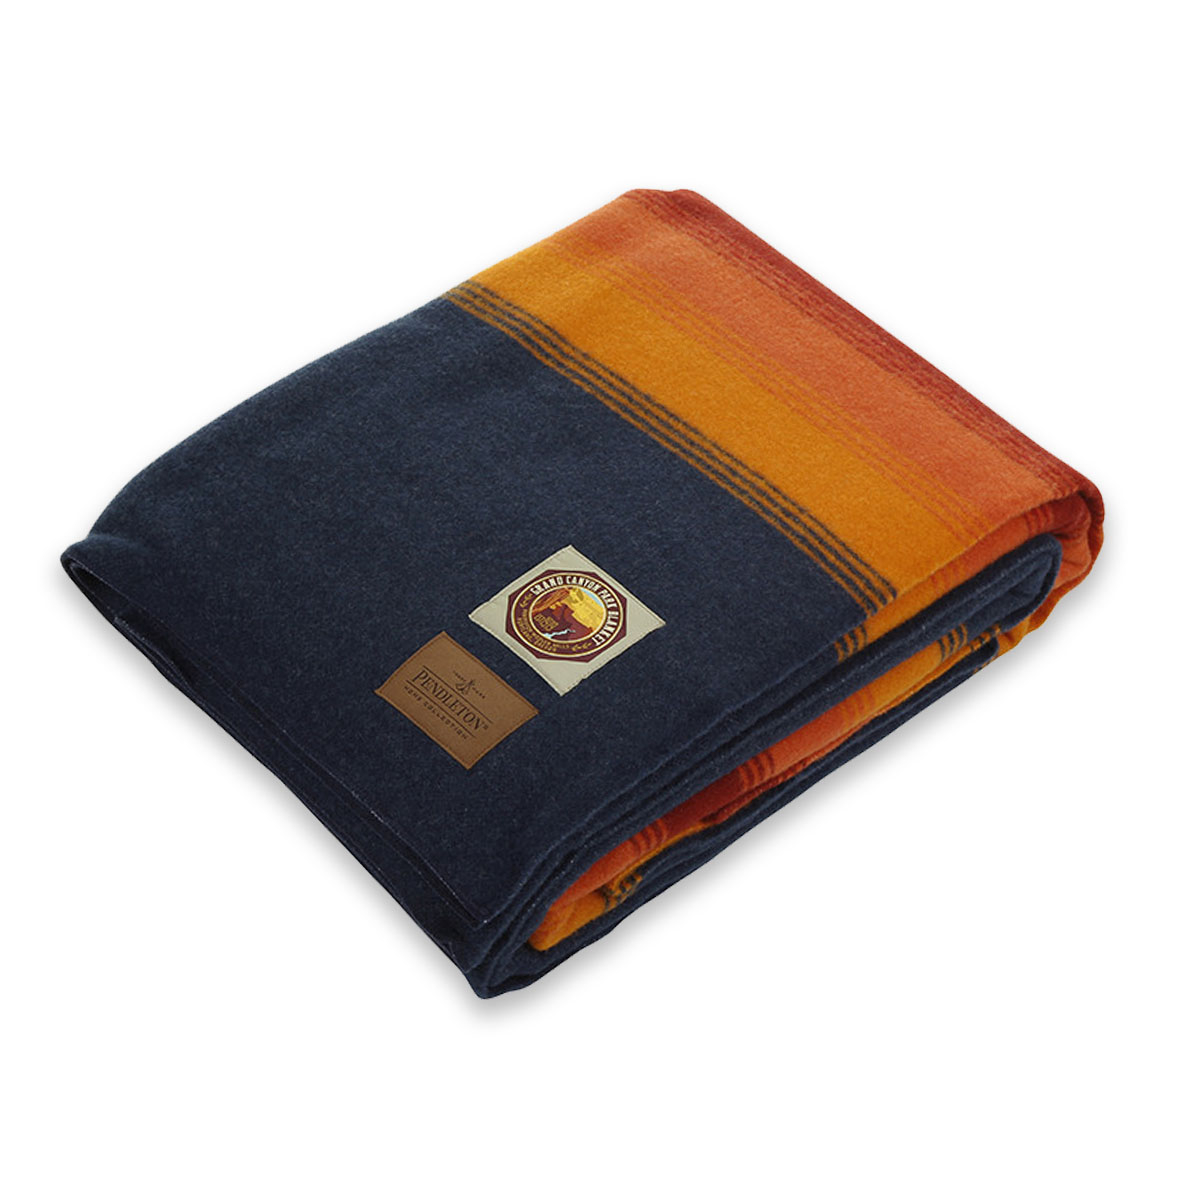 Pendleton National Park Full Blanket Grand Canyon Navy, perfect blanket for chilly night